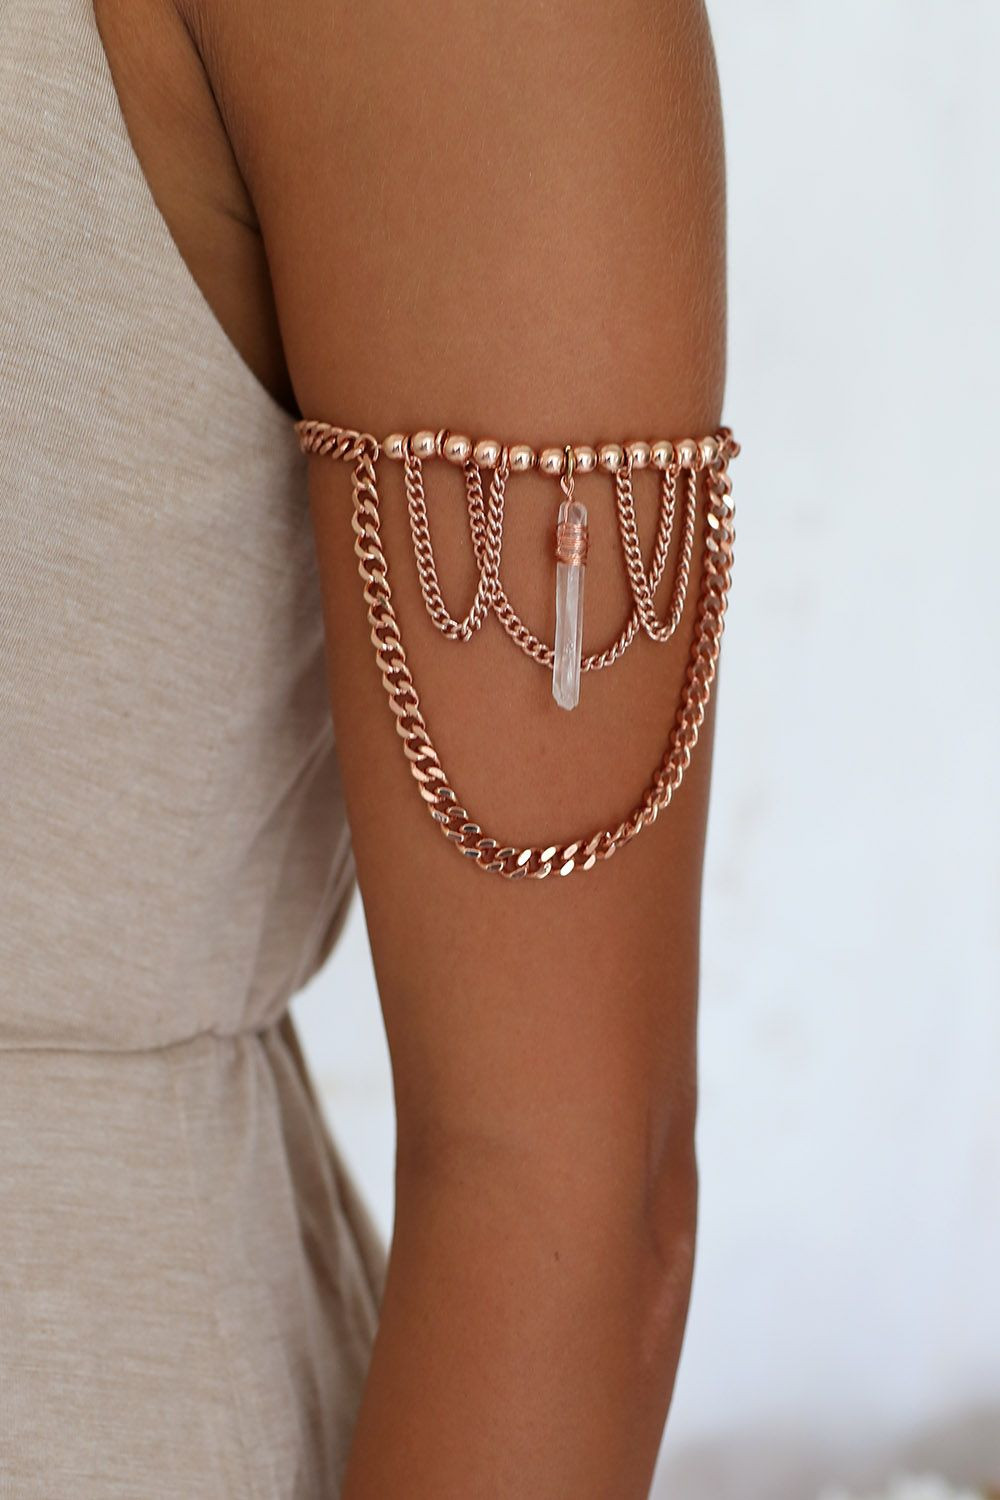 Body Jewelry Arm
 Sabo Skirt Rose Gold Arm Chain